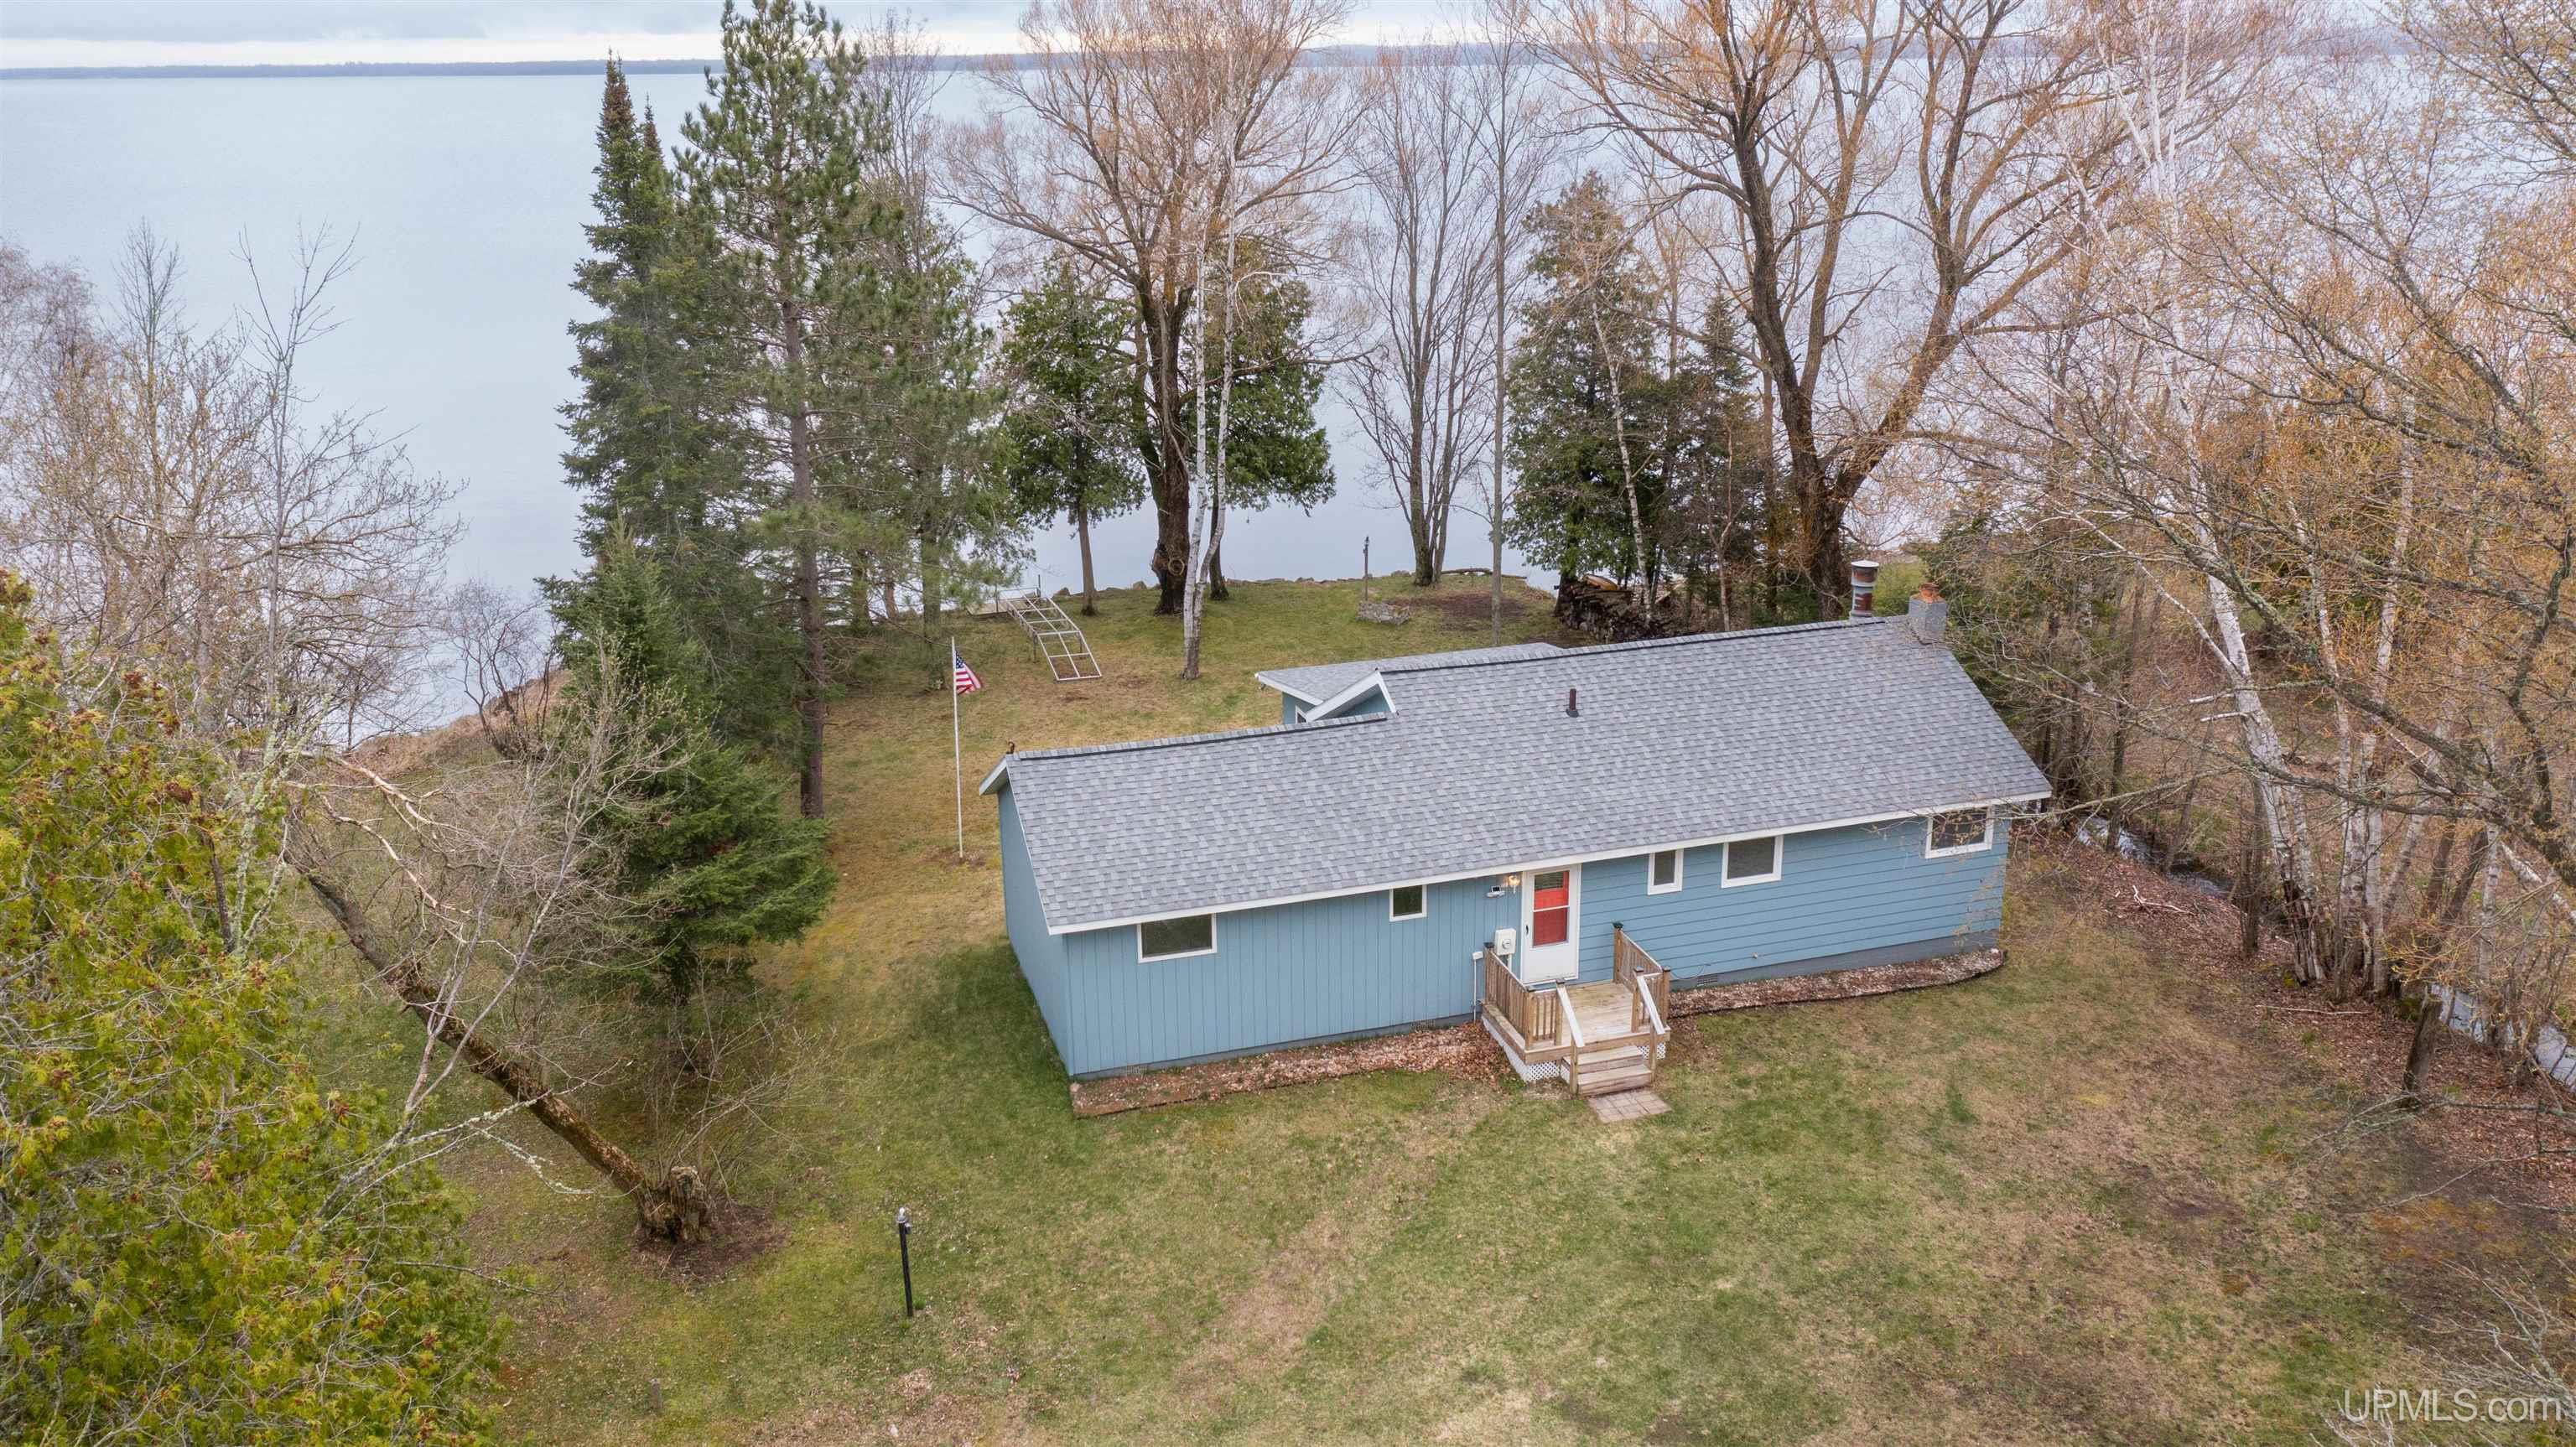 Photo # for Listing #50136400 in Manistique